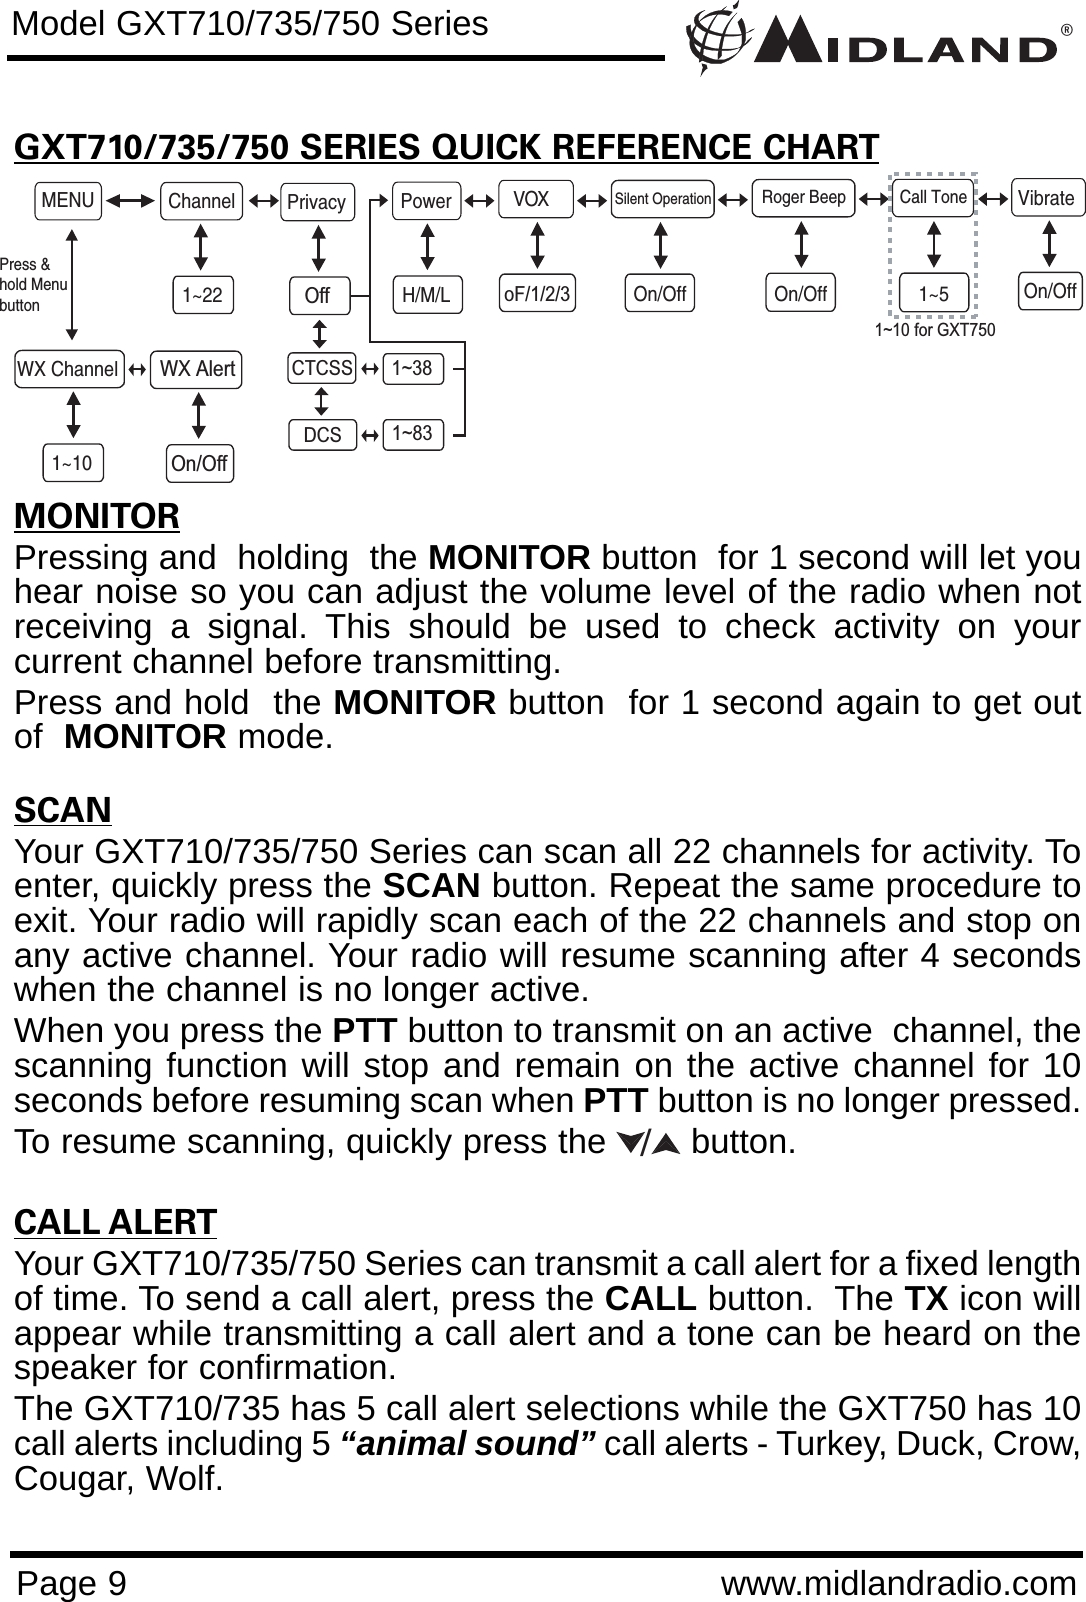 ®Page 9 www.midlandradio.comGXT710/735/750 SERIES QUICK REFERENCE CHARTMONITORPressing and  holding  the MONITOR button  for 1 second will let youhear noise so you can adjust the volume level of the radio when notreceiving a signal. This should be used to check activity on yourcurrent channel before transmitting. Press and hold  the MONITOR button  for 1 second again to get outof  MONITOR mode.SCANYour GXT710/735/750 Series can scan all 22 channels for activity. Toenter, quickly press the SCAN button. Repeat the same procedure toexit. Your radio will rapidly scan each of the 22 channels and stop onany active channel. Your radio will resume scanning after 4 secondswhen the channel is no longer active.When you press the PTT button to transmit on an active  channel, thescanning function will stop and remain on the active channel for 10seconds before resuming scan when PTT button is no longer pressed. To resume scanning, quickly press the  button.CALL ALERTYour GXT710/735/750 Series can transmit a call alert for a fixed lengthof time. To send a call alert, press the CALL button.  The TX icon willappear while transmitting a call alert and a tone can be heard on thespeaker for confirmation. The GXT710/735 has 5 call alert selections while the GXT750 has 10call alerts including 5 “animal sound” call alerts - Turkey, Duck, Crow,Cougar, Wolf.Model GXT710/735/750 SeriesMENU Channel VOX1~22PrivacyRoger BeepOn/OffPowerH/M/LCall Tone1~5VibrateOn/OffWX Channel1~10Press &amp;hold MenubuttonSilent OperationOn/OffoF/1/2/3OffCTCSSDCS1~381~83WX AlertOn/Off1~10 for GXT750/